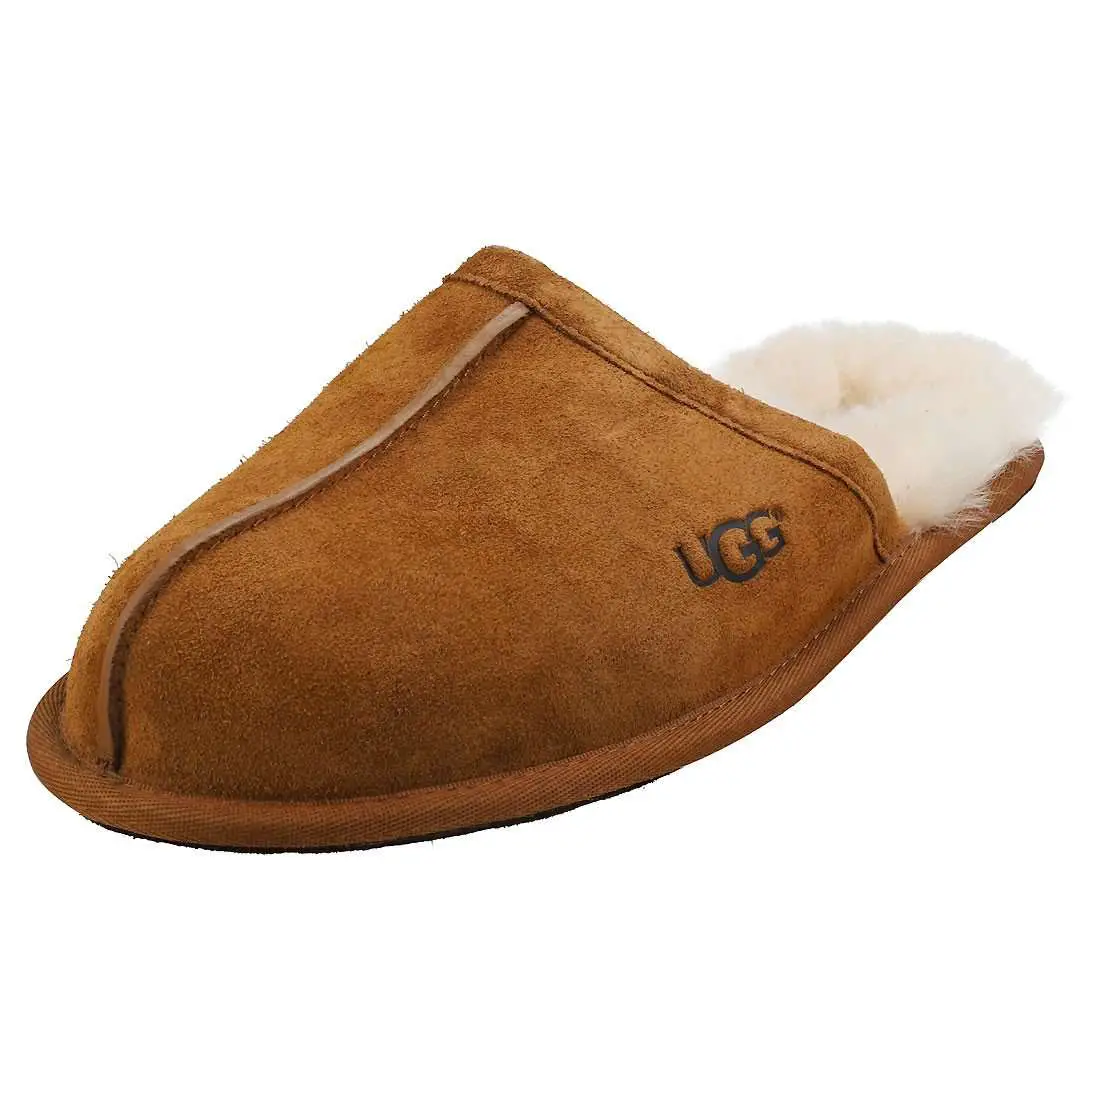 UGG Scuff 1101111 Mens Slippers Shoes in Chestnut